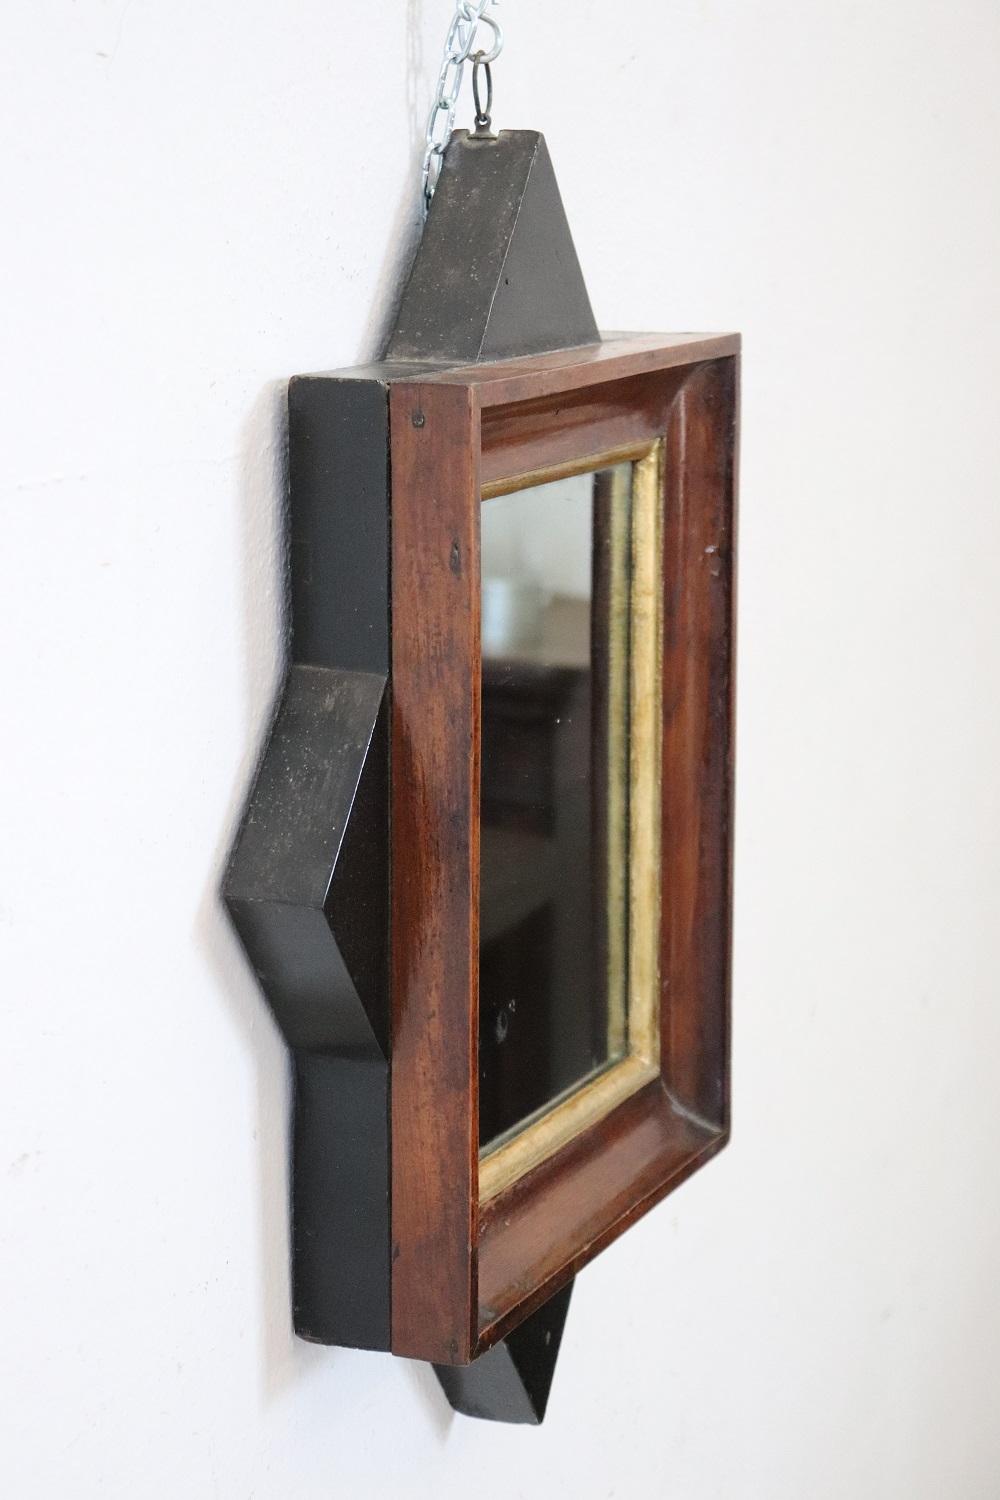 Early 19th century Italian wall mirror characterized by a walnut wood frame with a particular star shape. Its small size makes it perfect also for decorating small rooms.